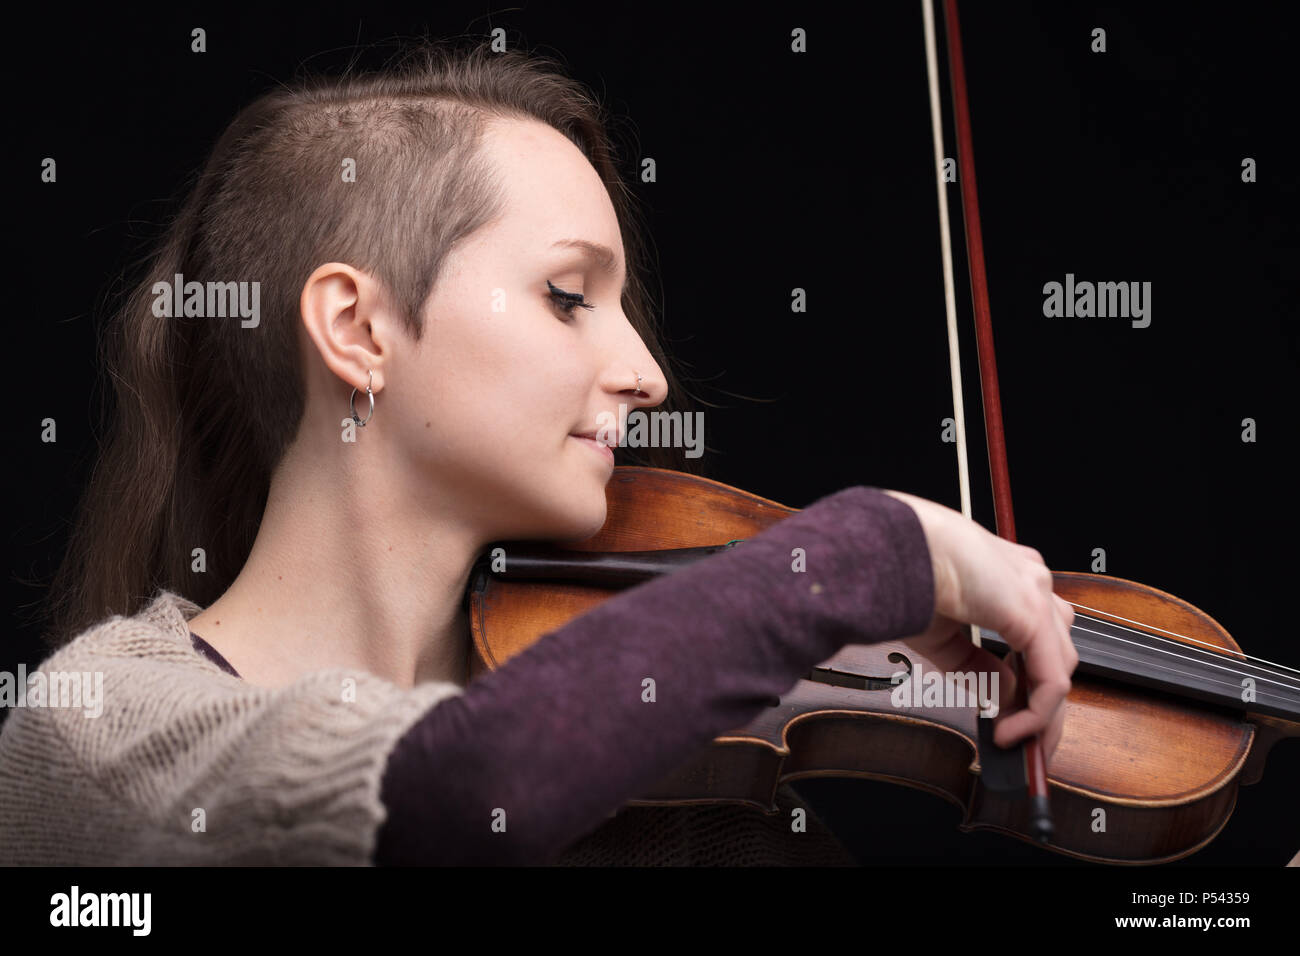 young woman with half of her hair shaved while playing a baroque violin on a black background Stock Photo